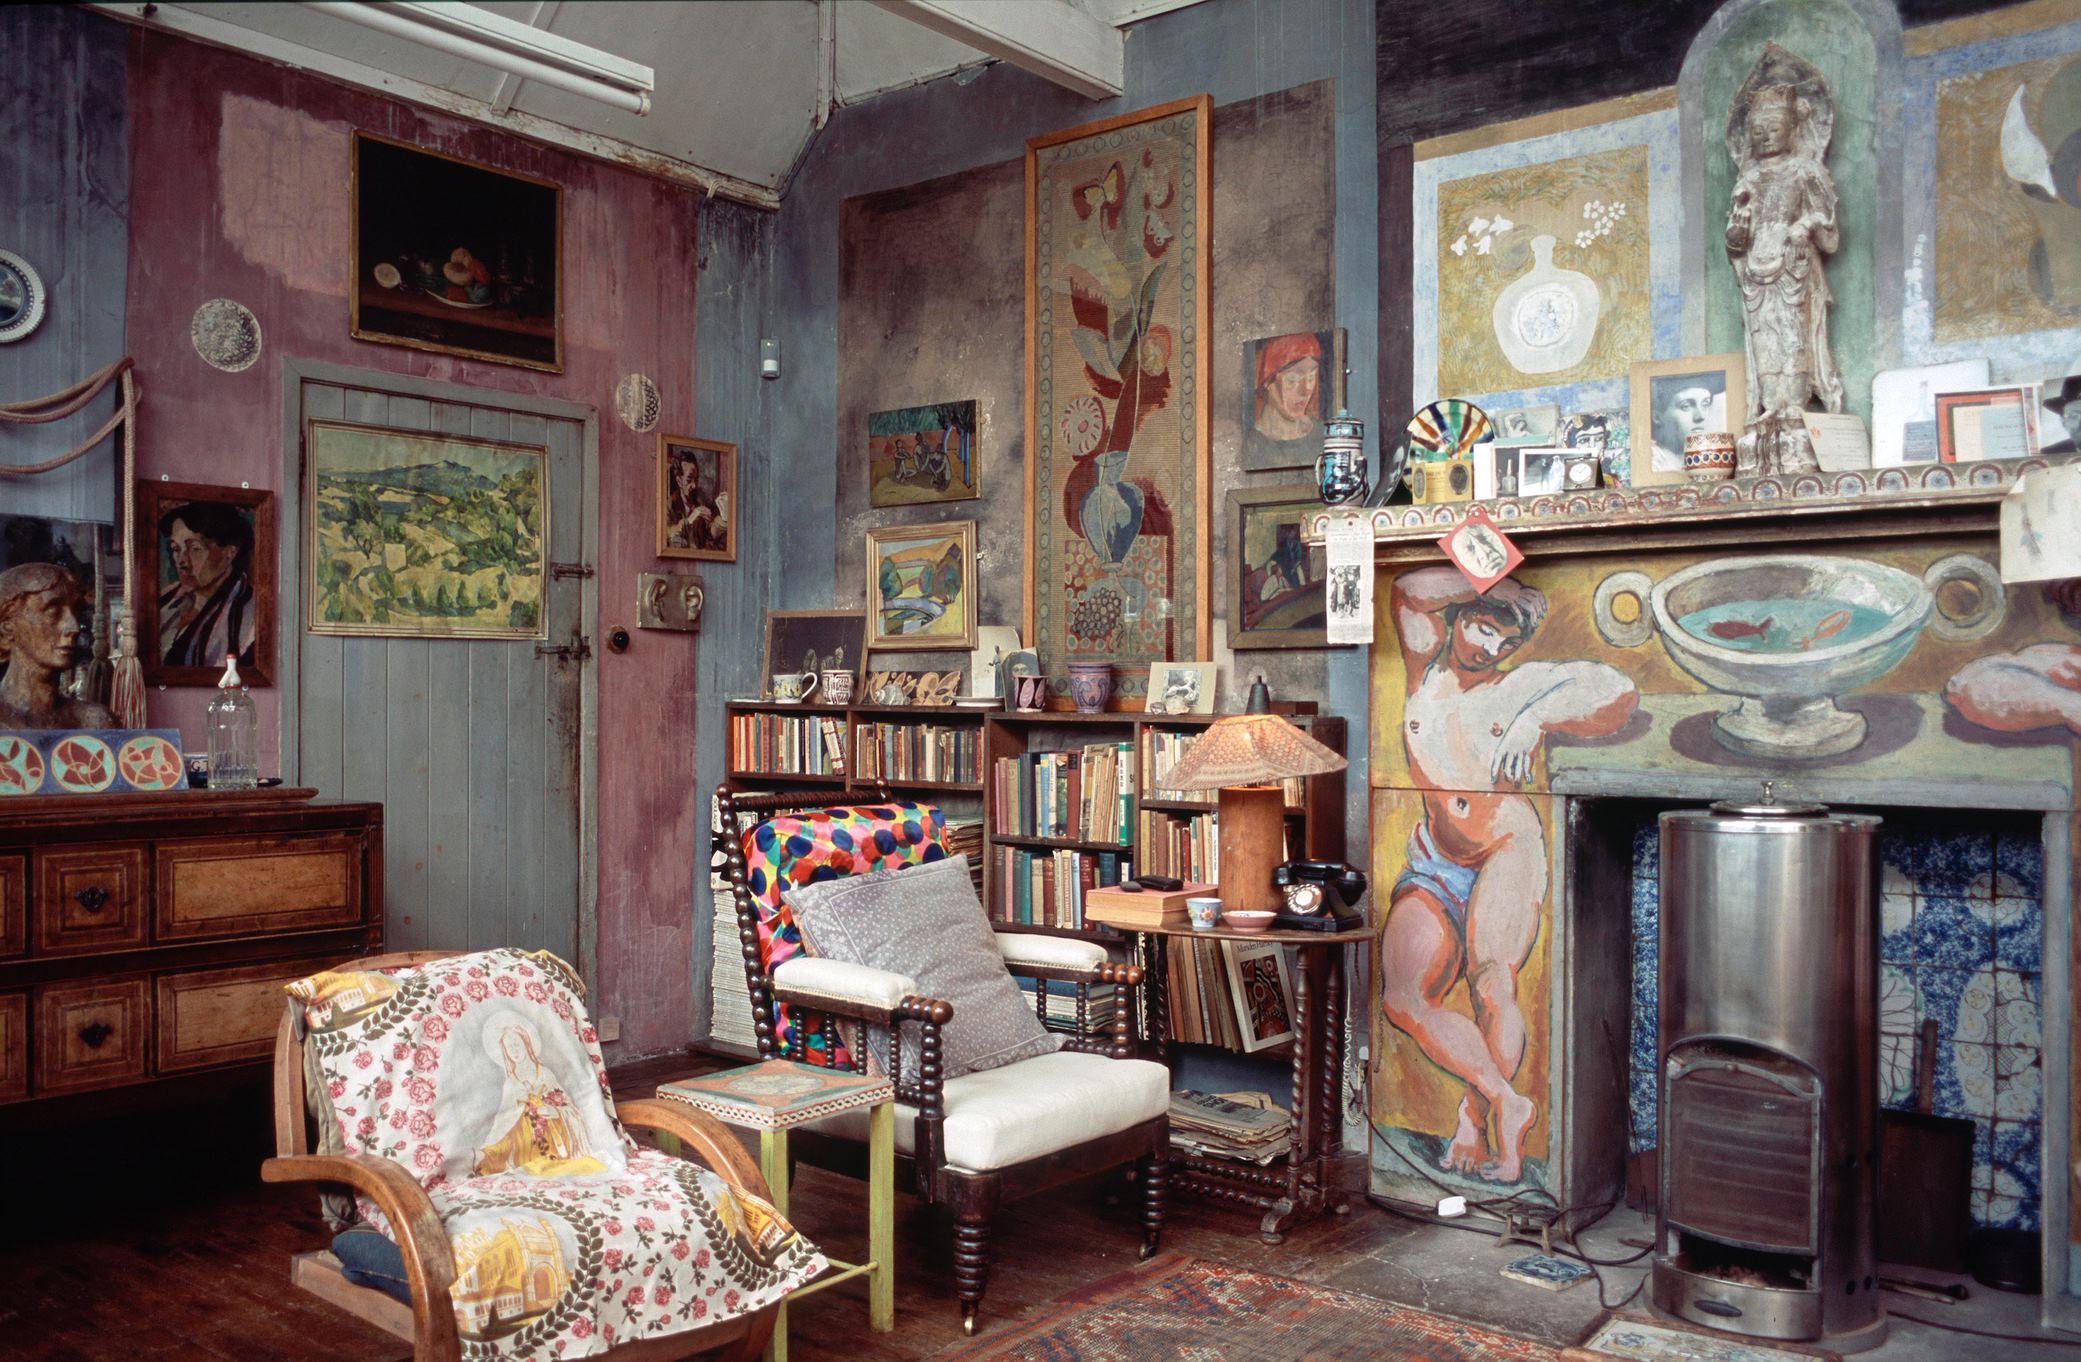 A cluttered corner of an indoor art studio - walls painted in various block colours, two chairs with multicoloured cushions, paintings and sculptures covering the walls. A bookshelf in the background and an unlit fireplace with a tiled and painted facade 